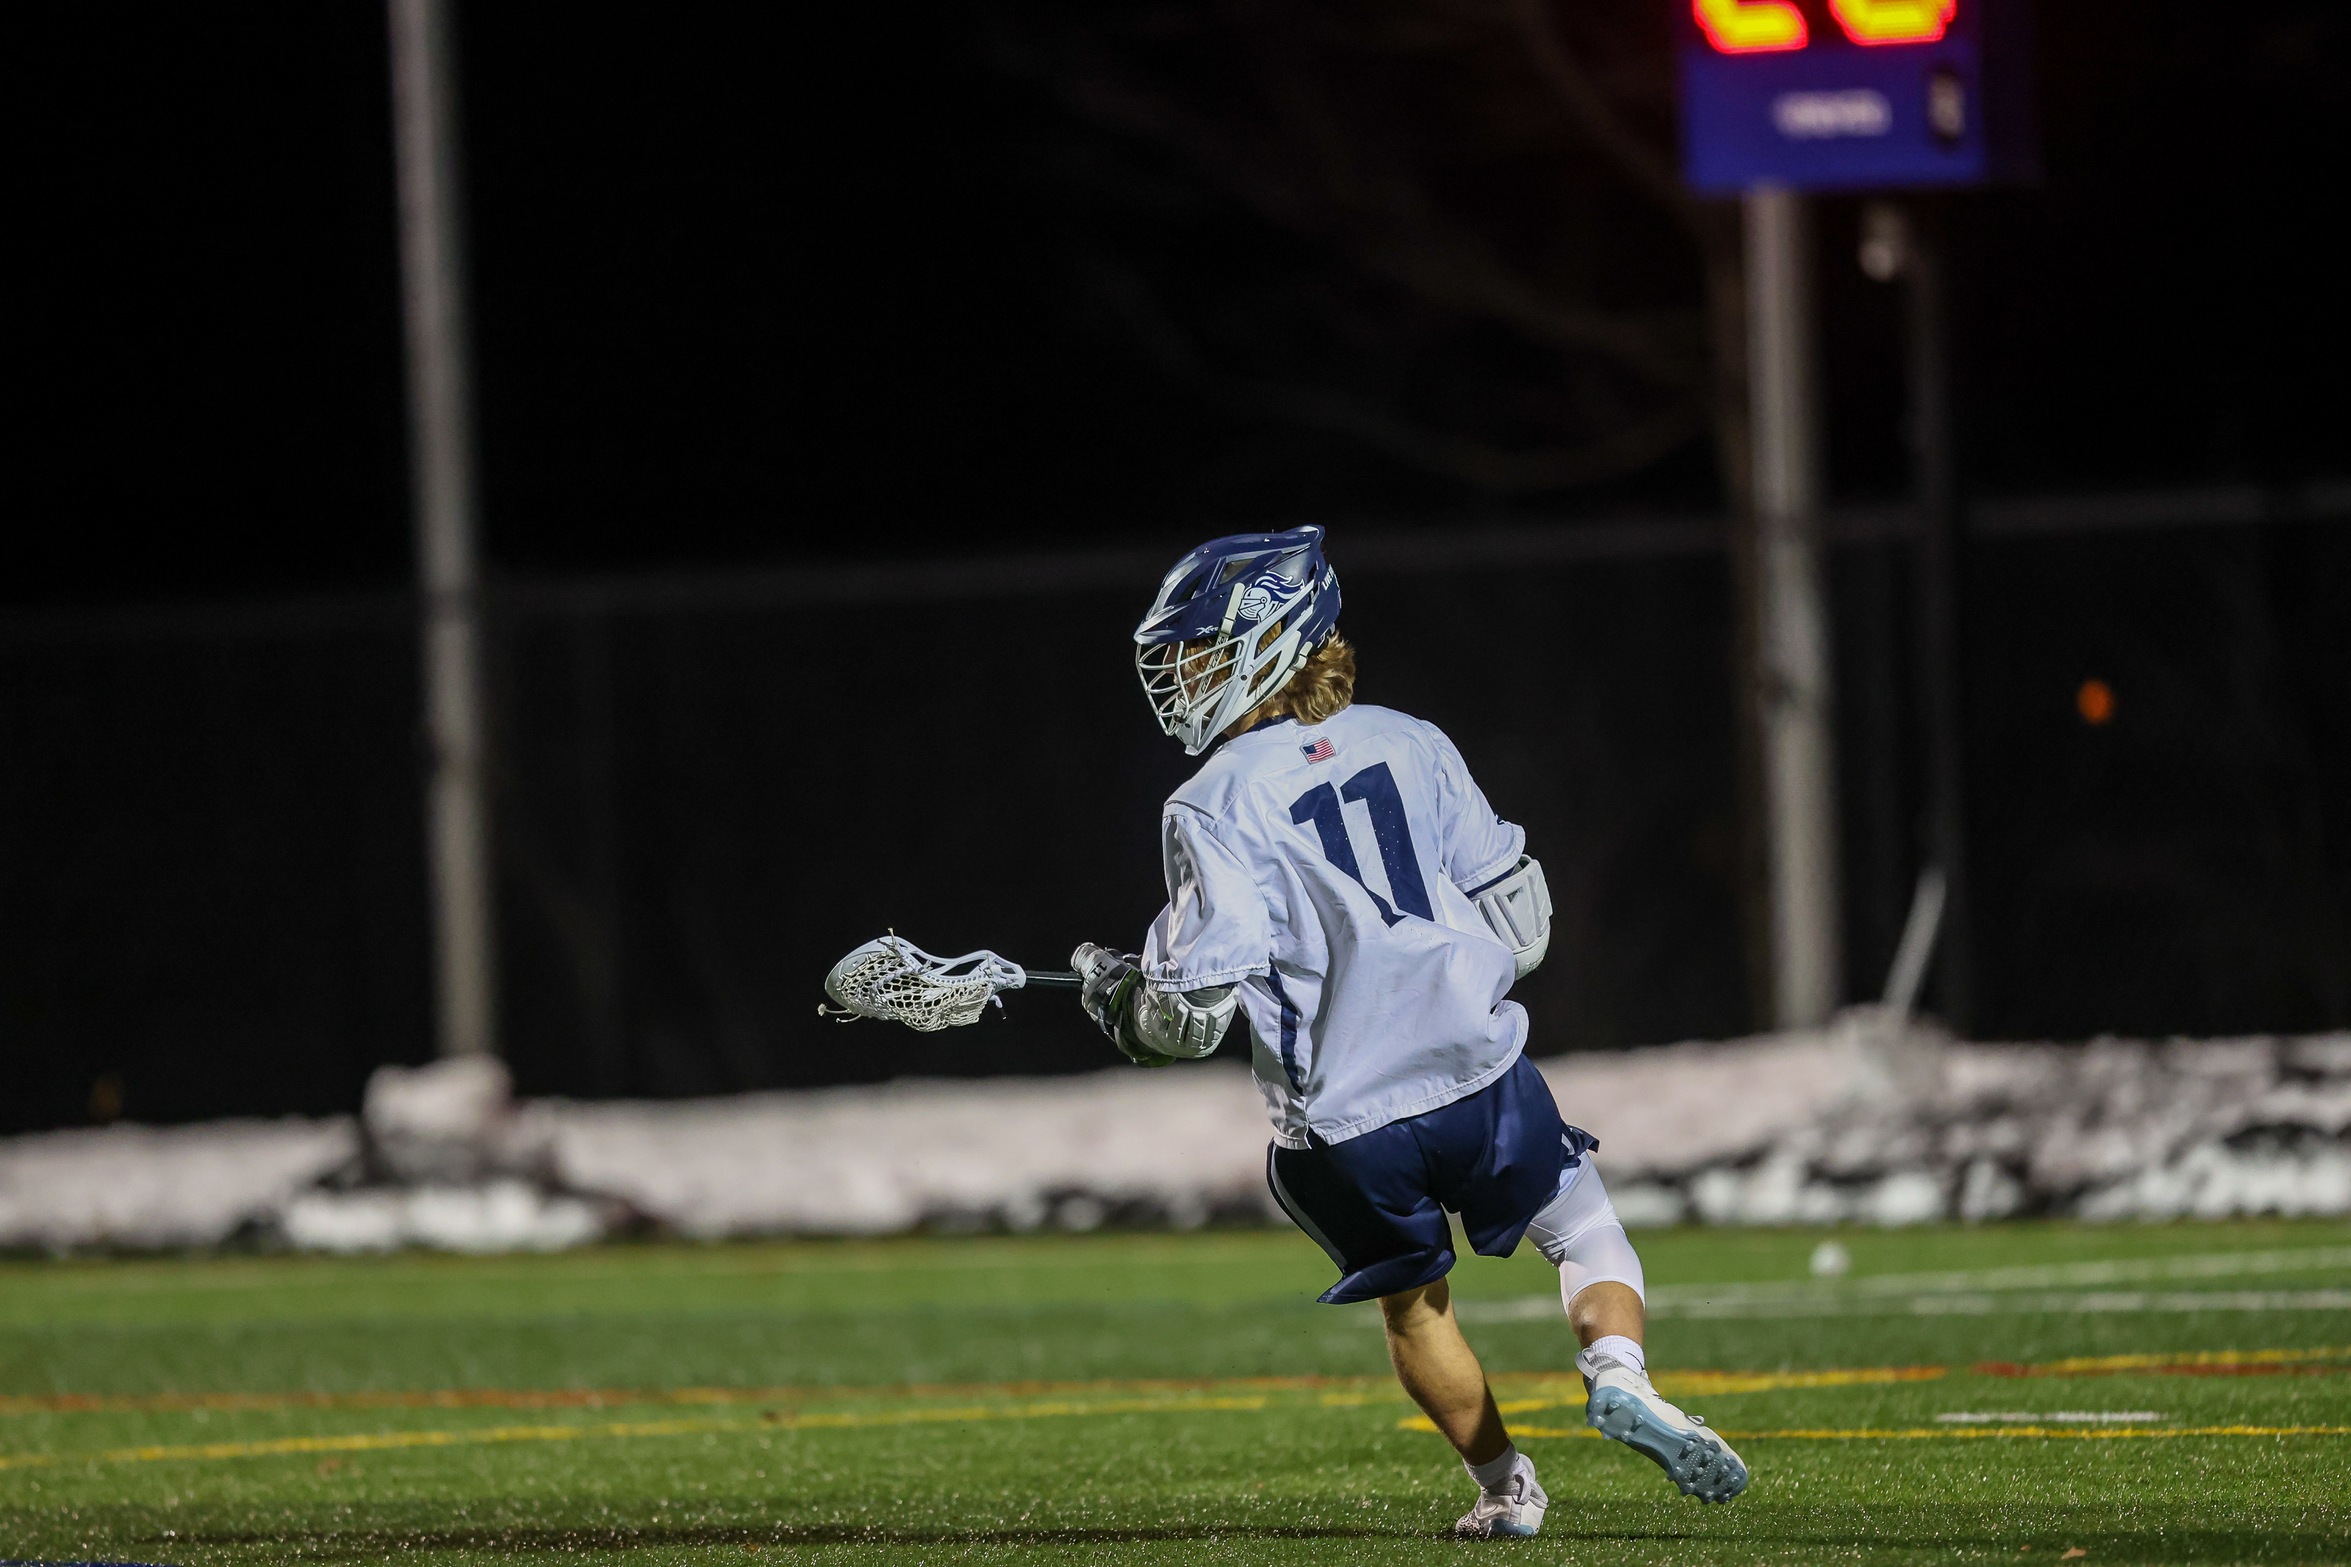 Mercier Leads Men’s Lacrosse with Six Goals to Take Down Cadets